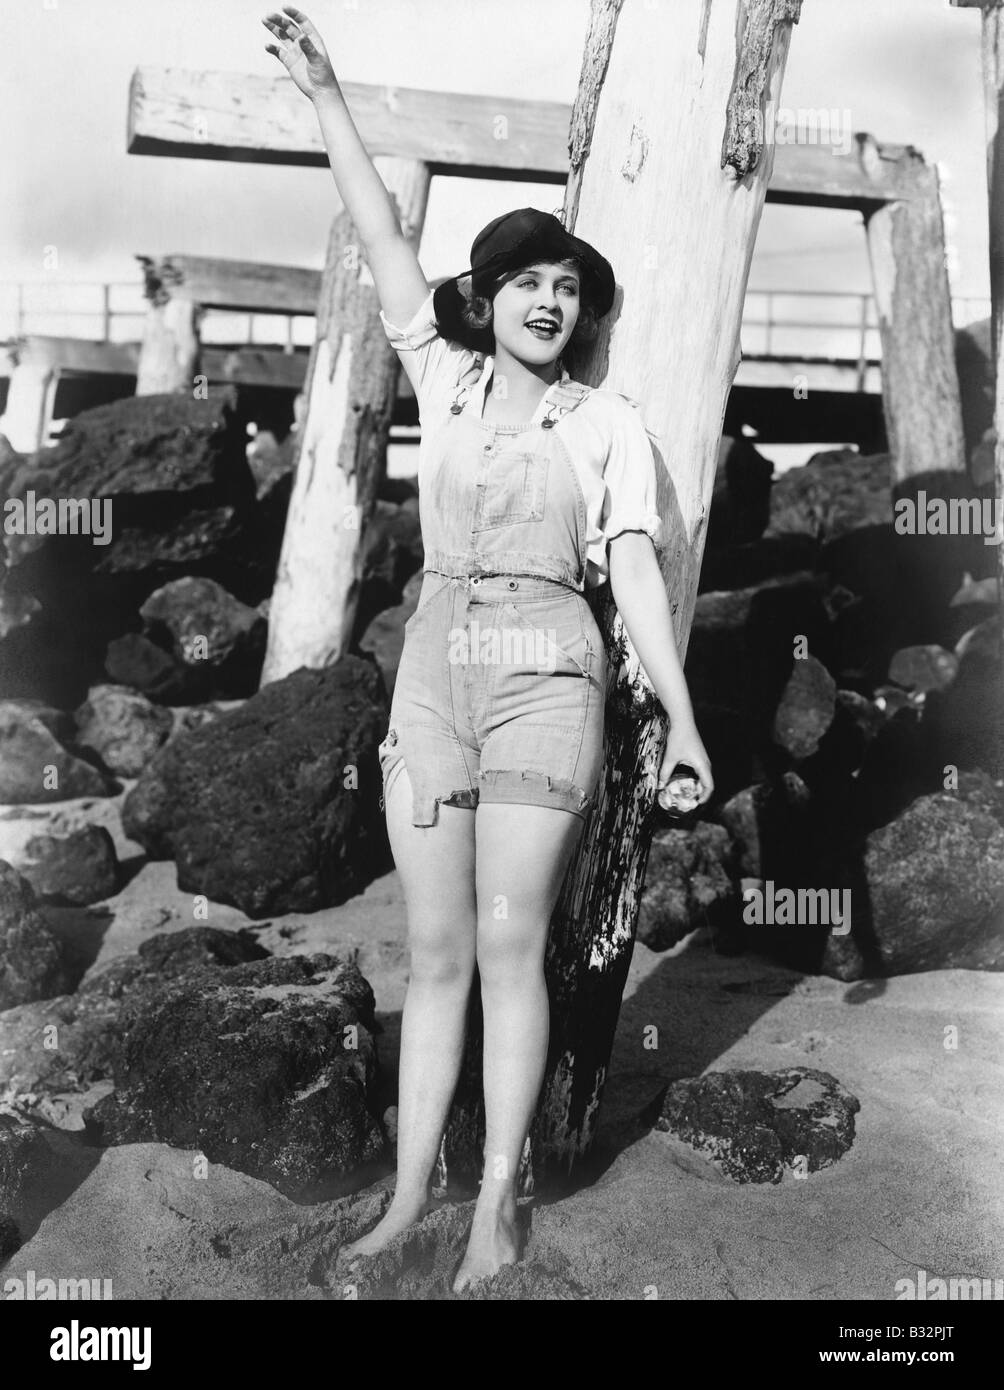 Woman with pilings at beach Stock Photo